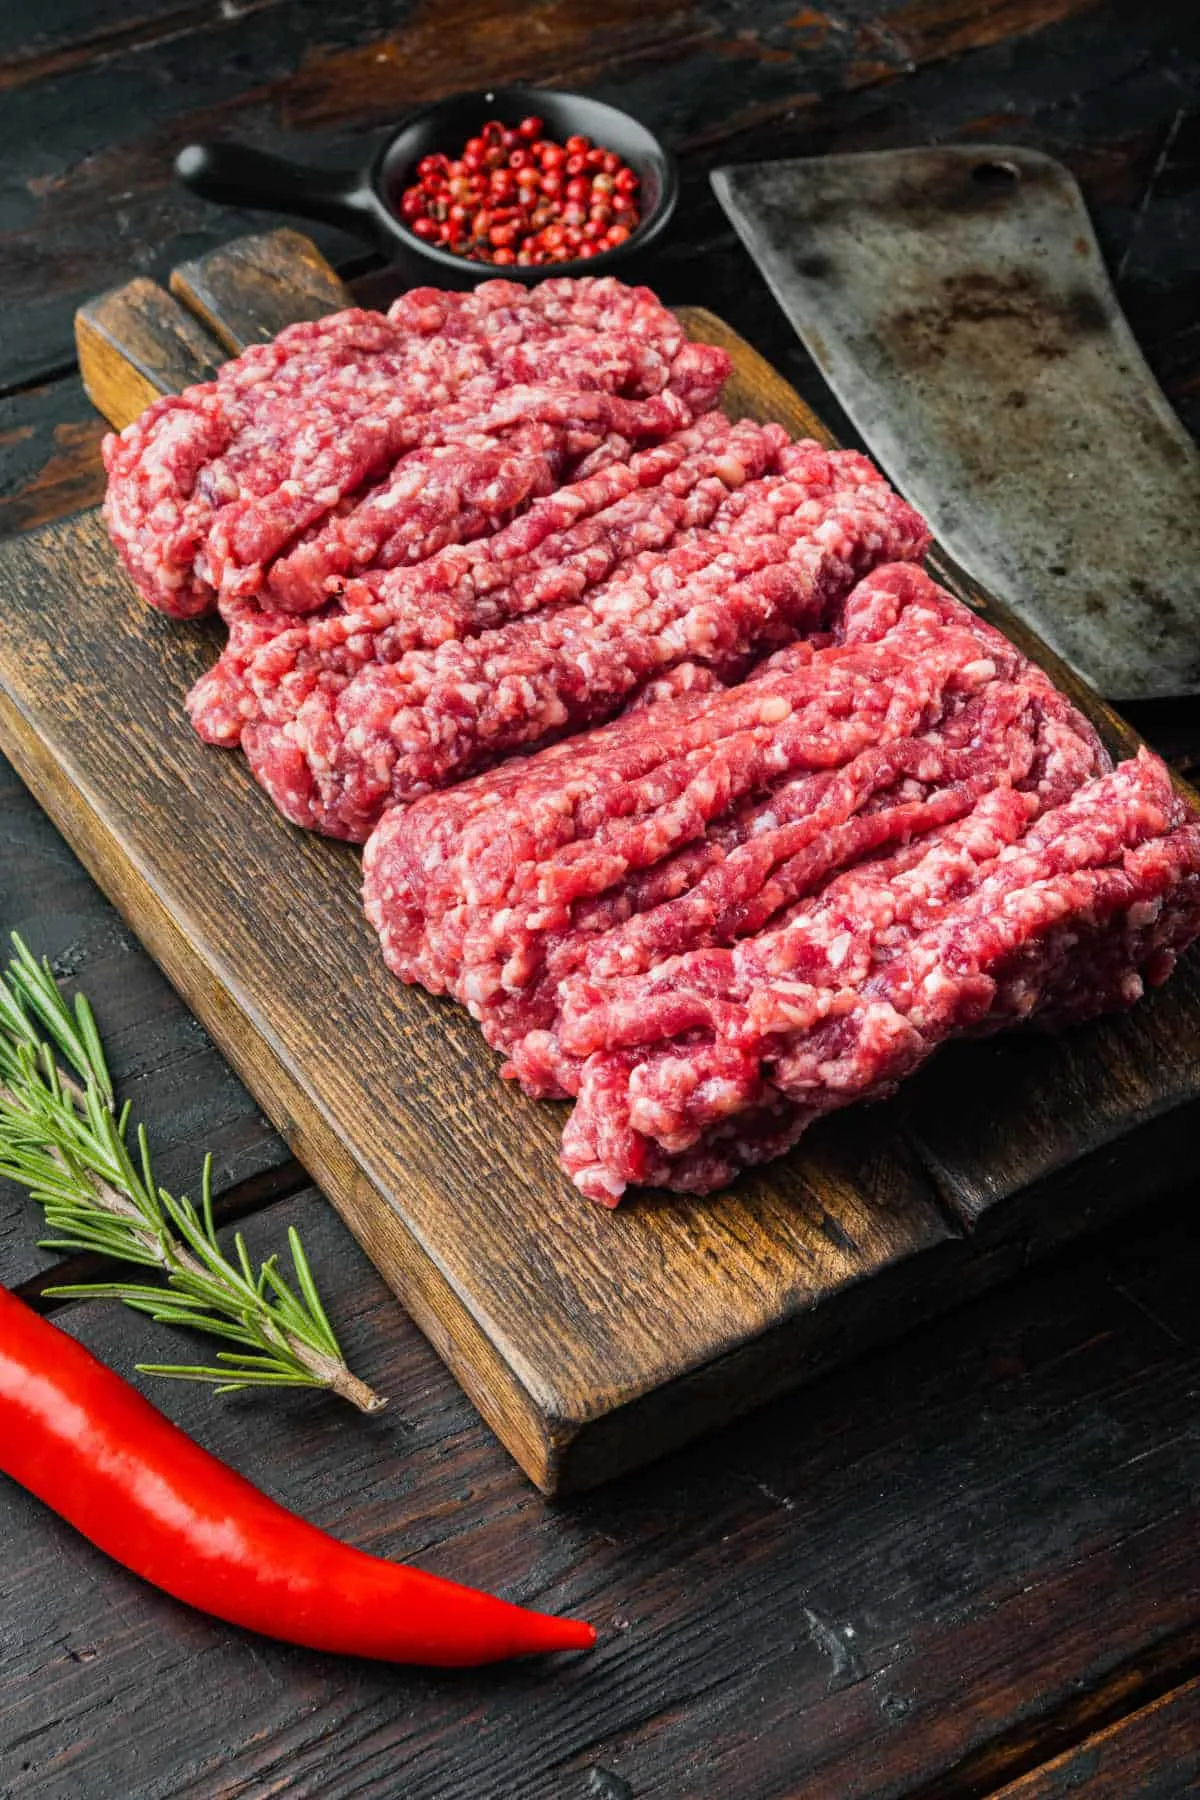 ground beef on a wood surface with peppercorns and a cleaver